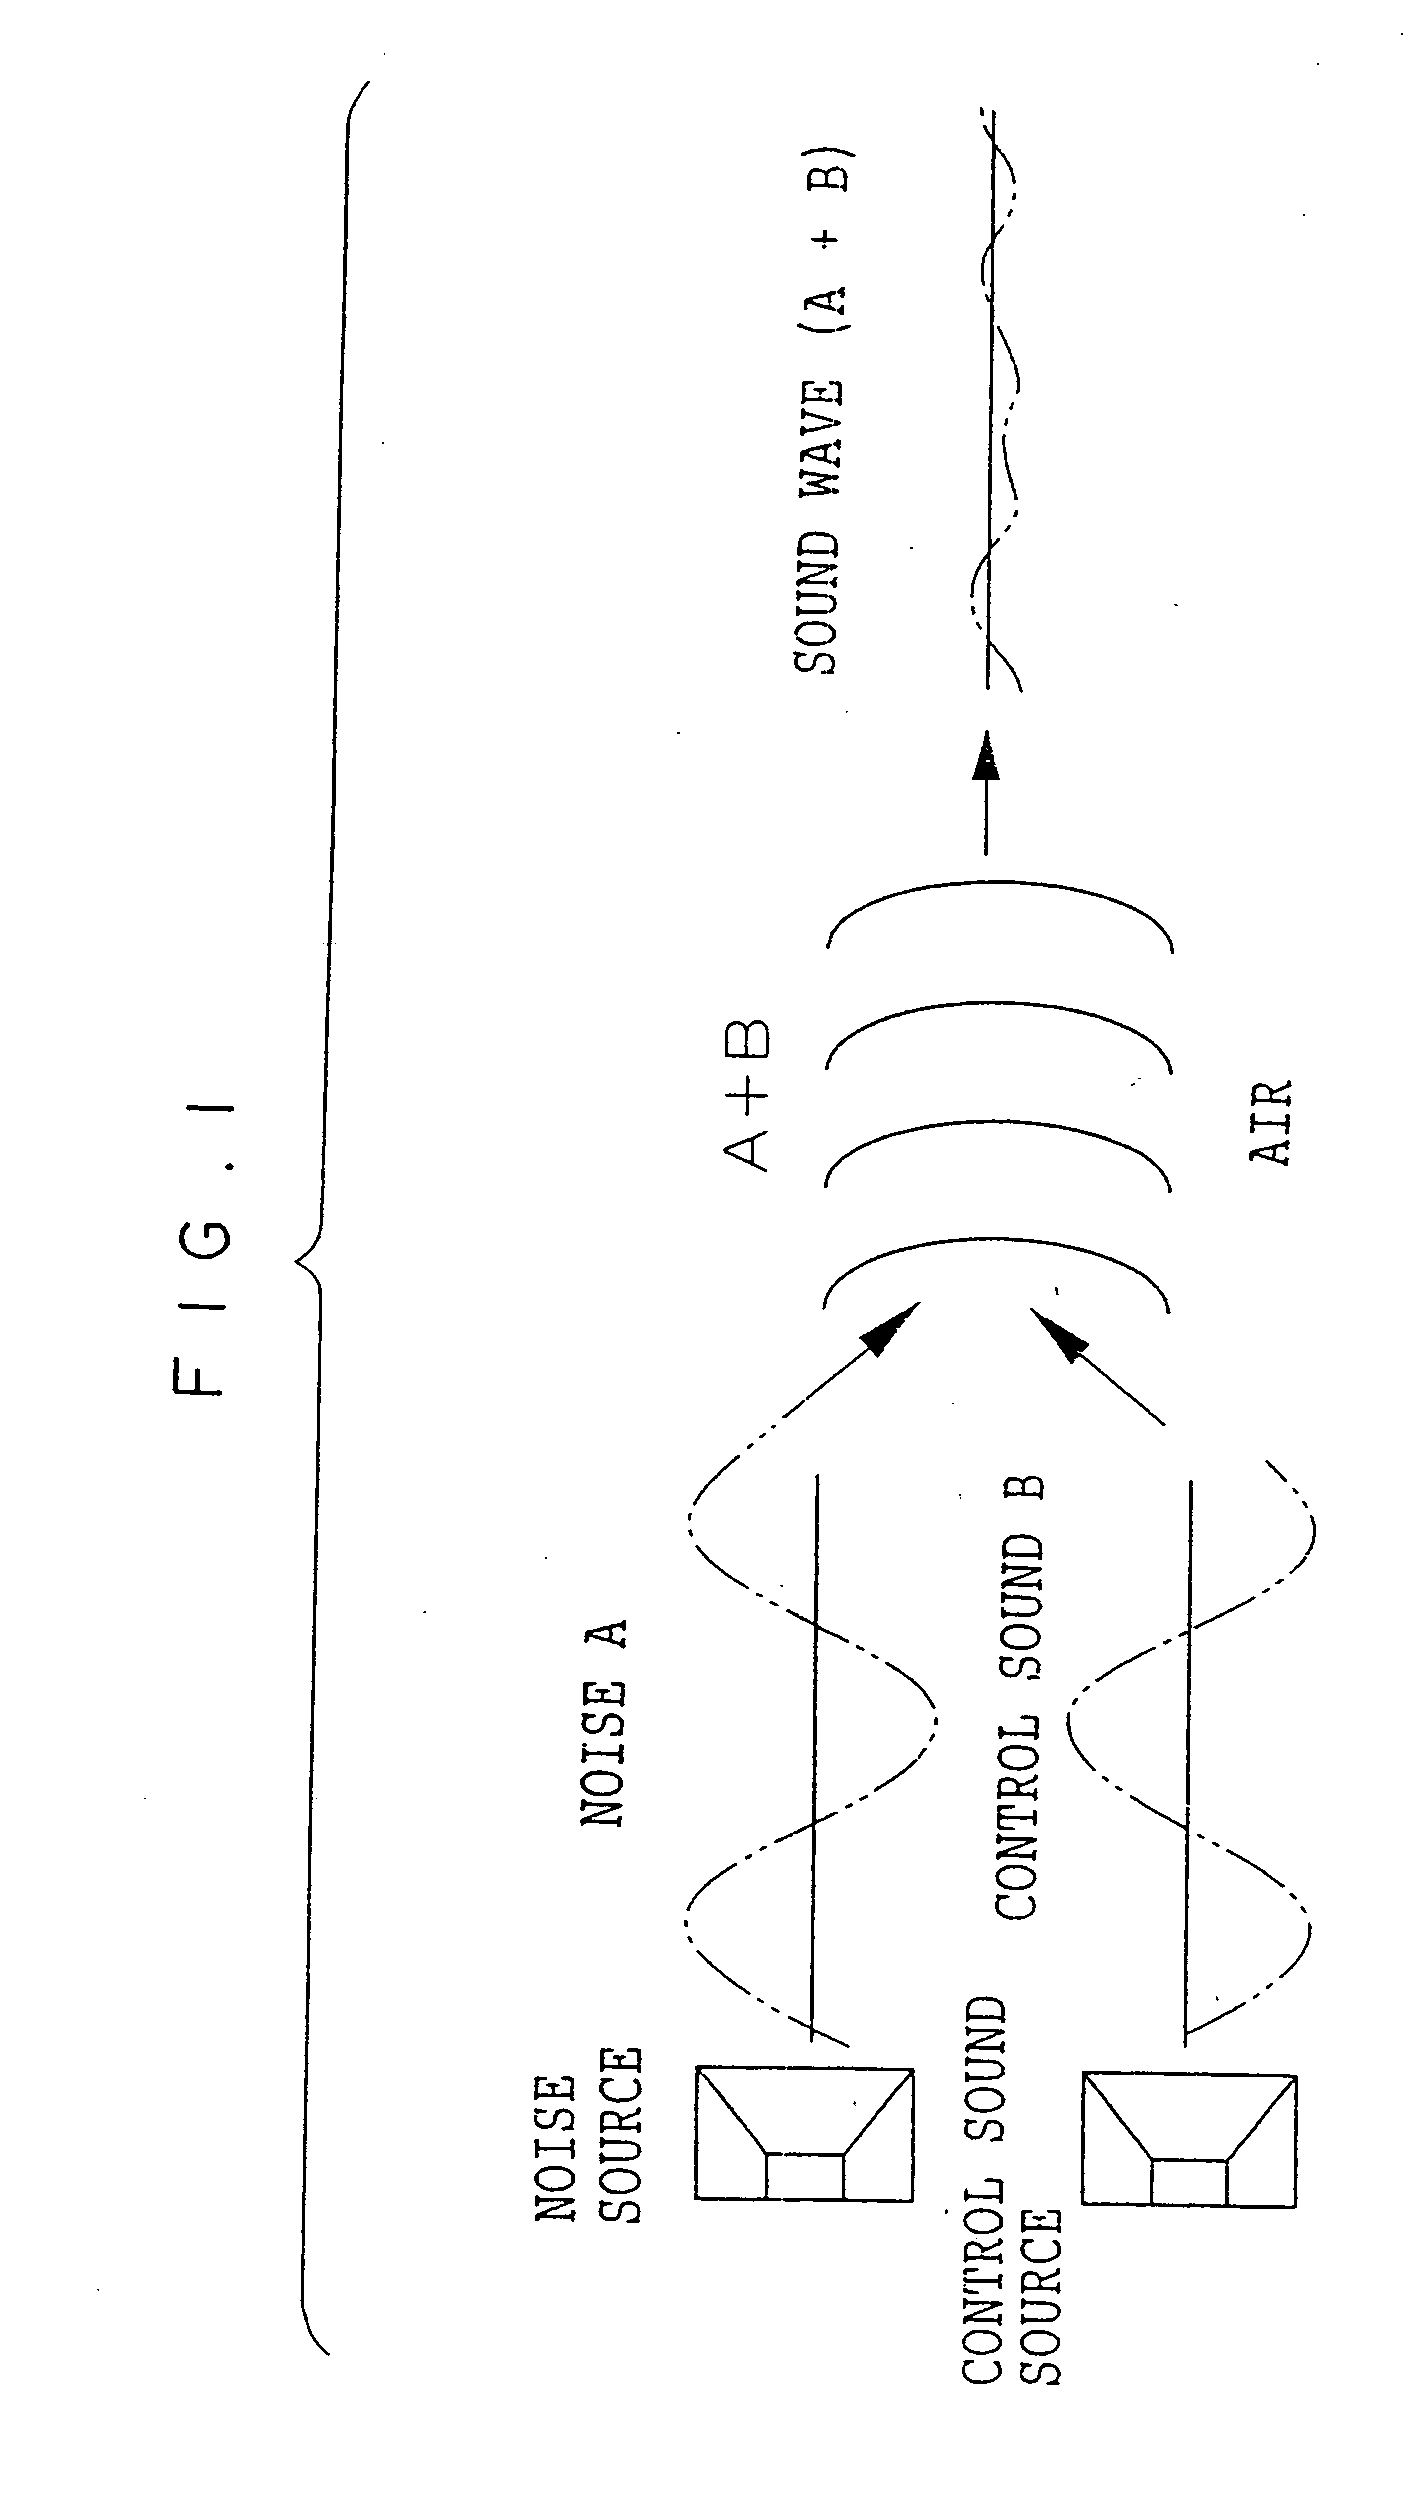 Noise reducing device